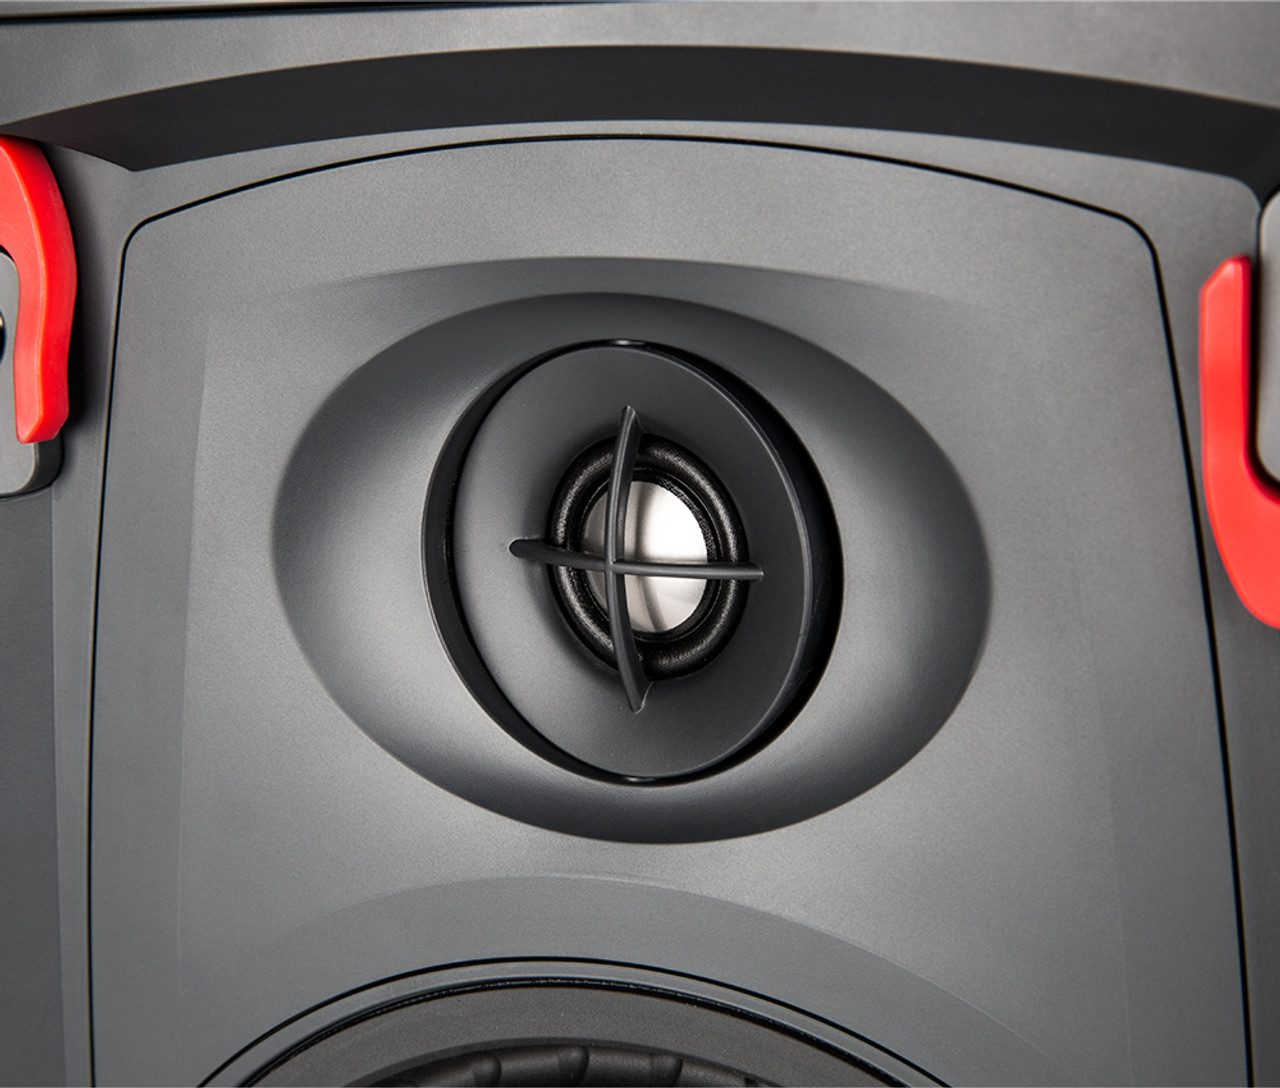 Episode Signature 7 Series 6" In-Wall Speaker (Each)